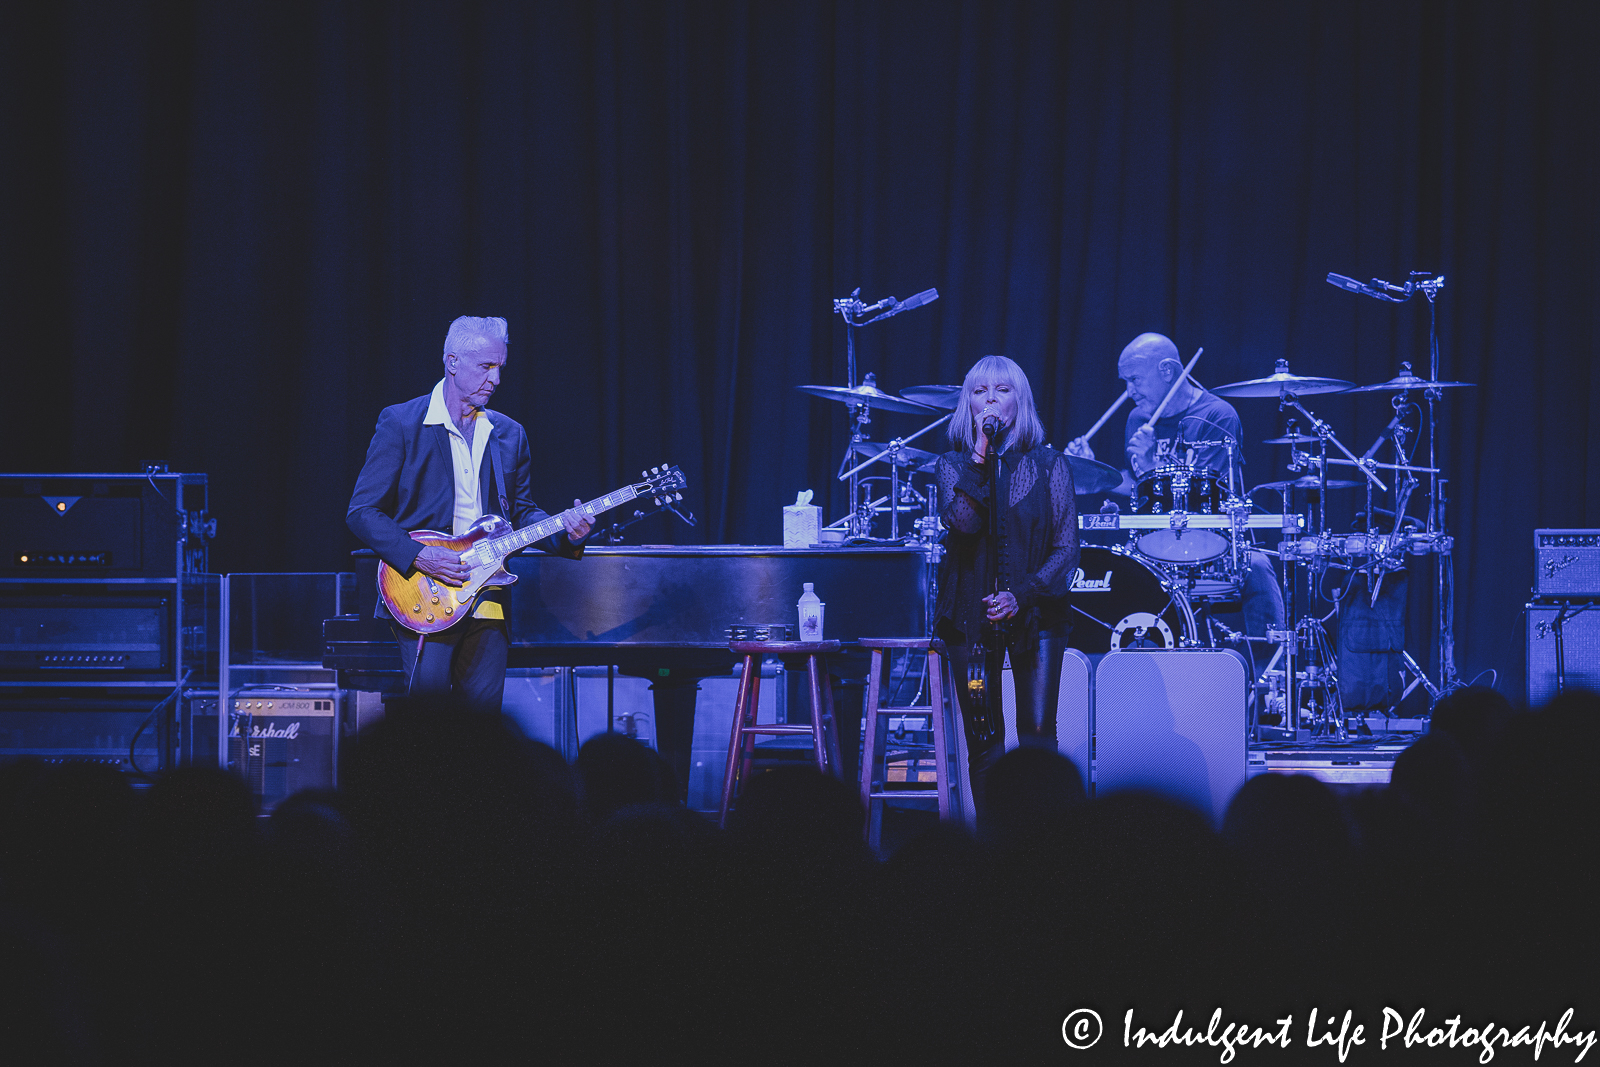 Pat Benatar & Neil Giraldo live in concert with drummer Chris Ralles at Uptown Theater in Kansas City, MO on August 2, 2022.